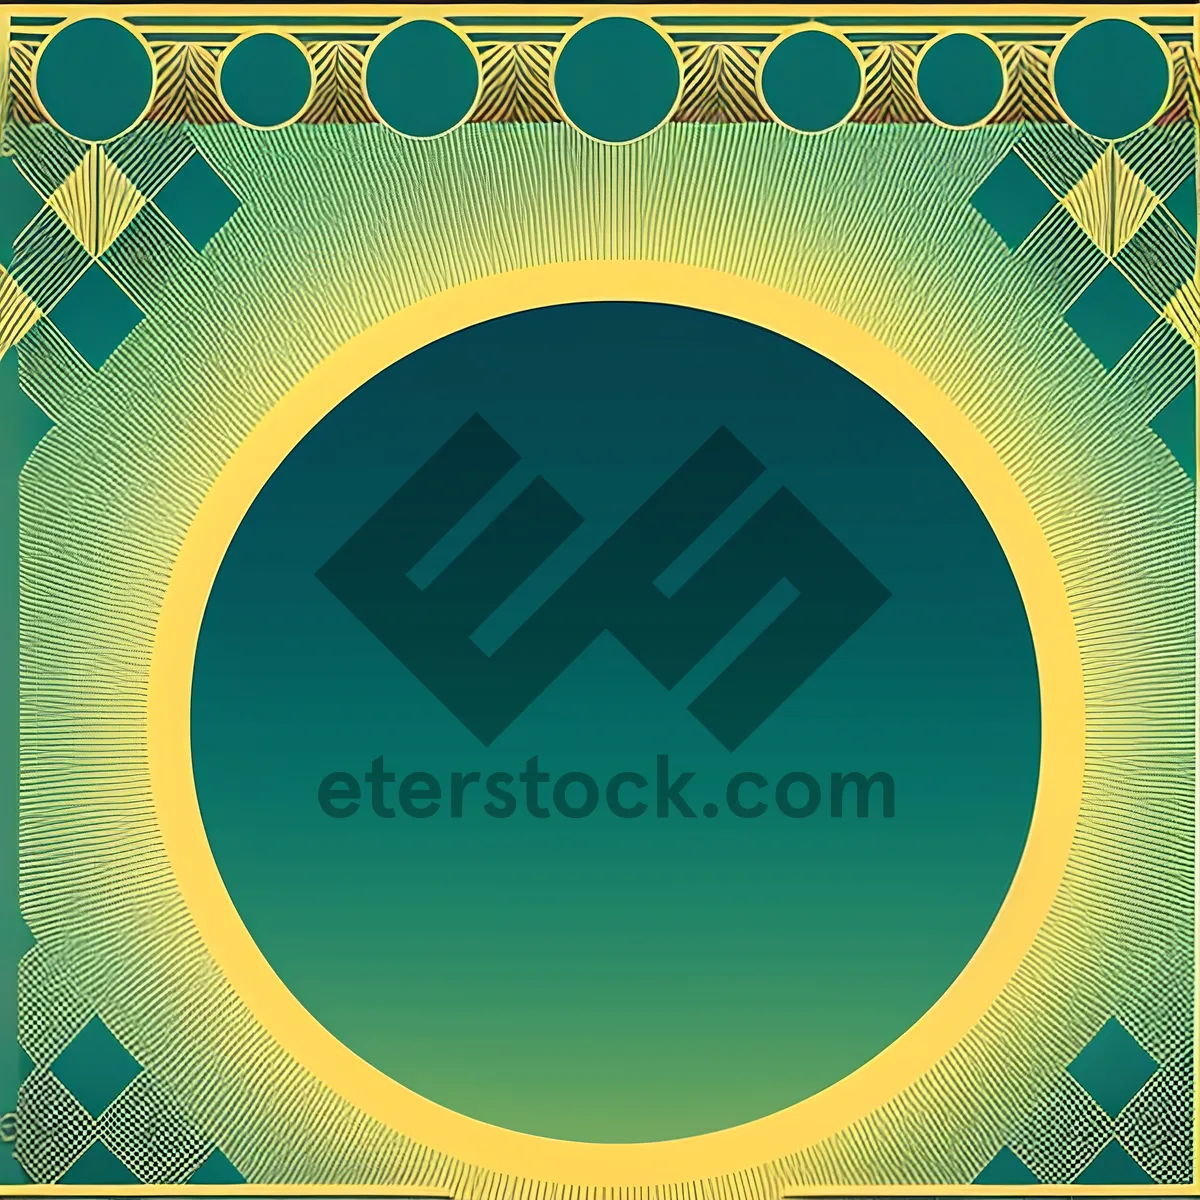 Picture of Modern Artistic Circle Design with Decorative Symmetry